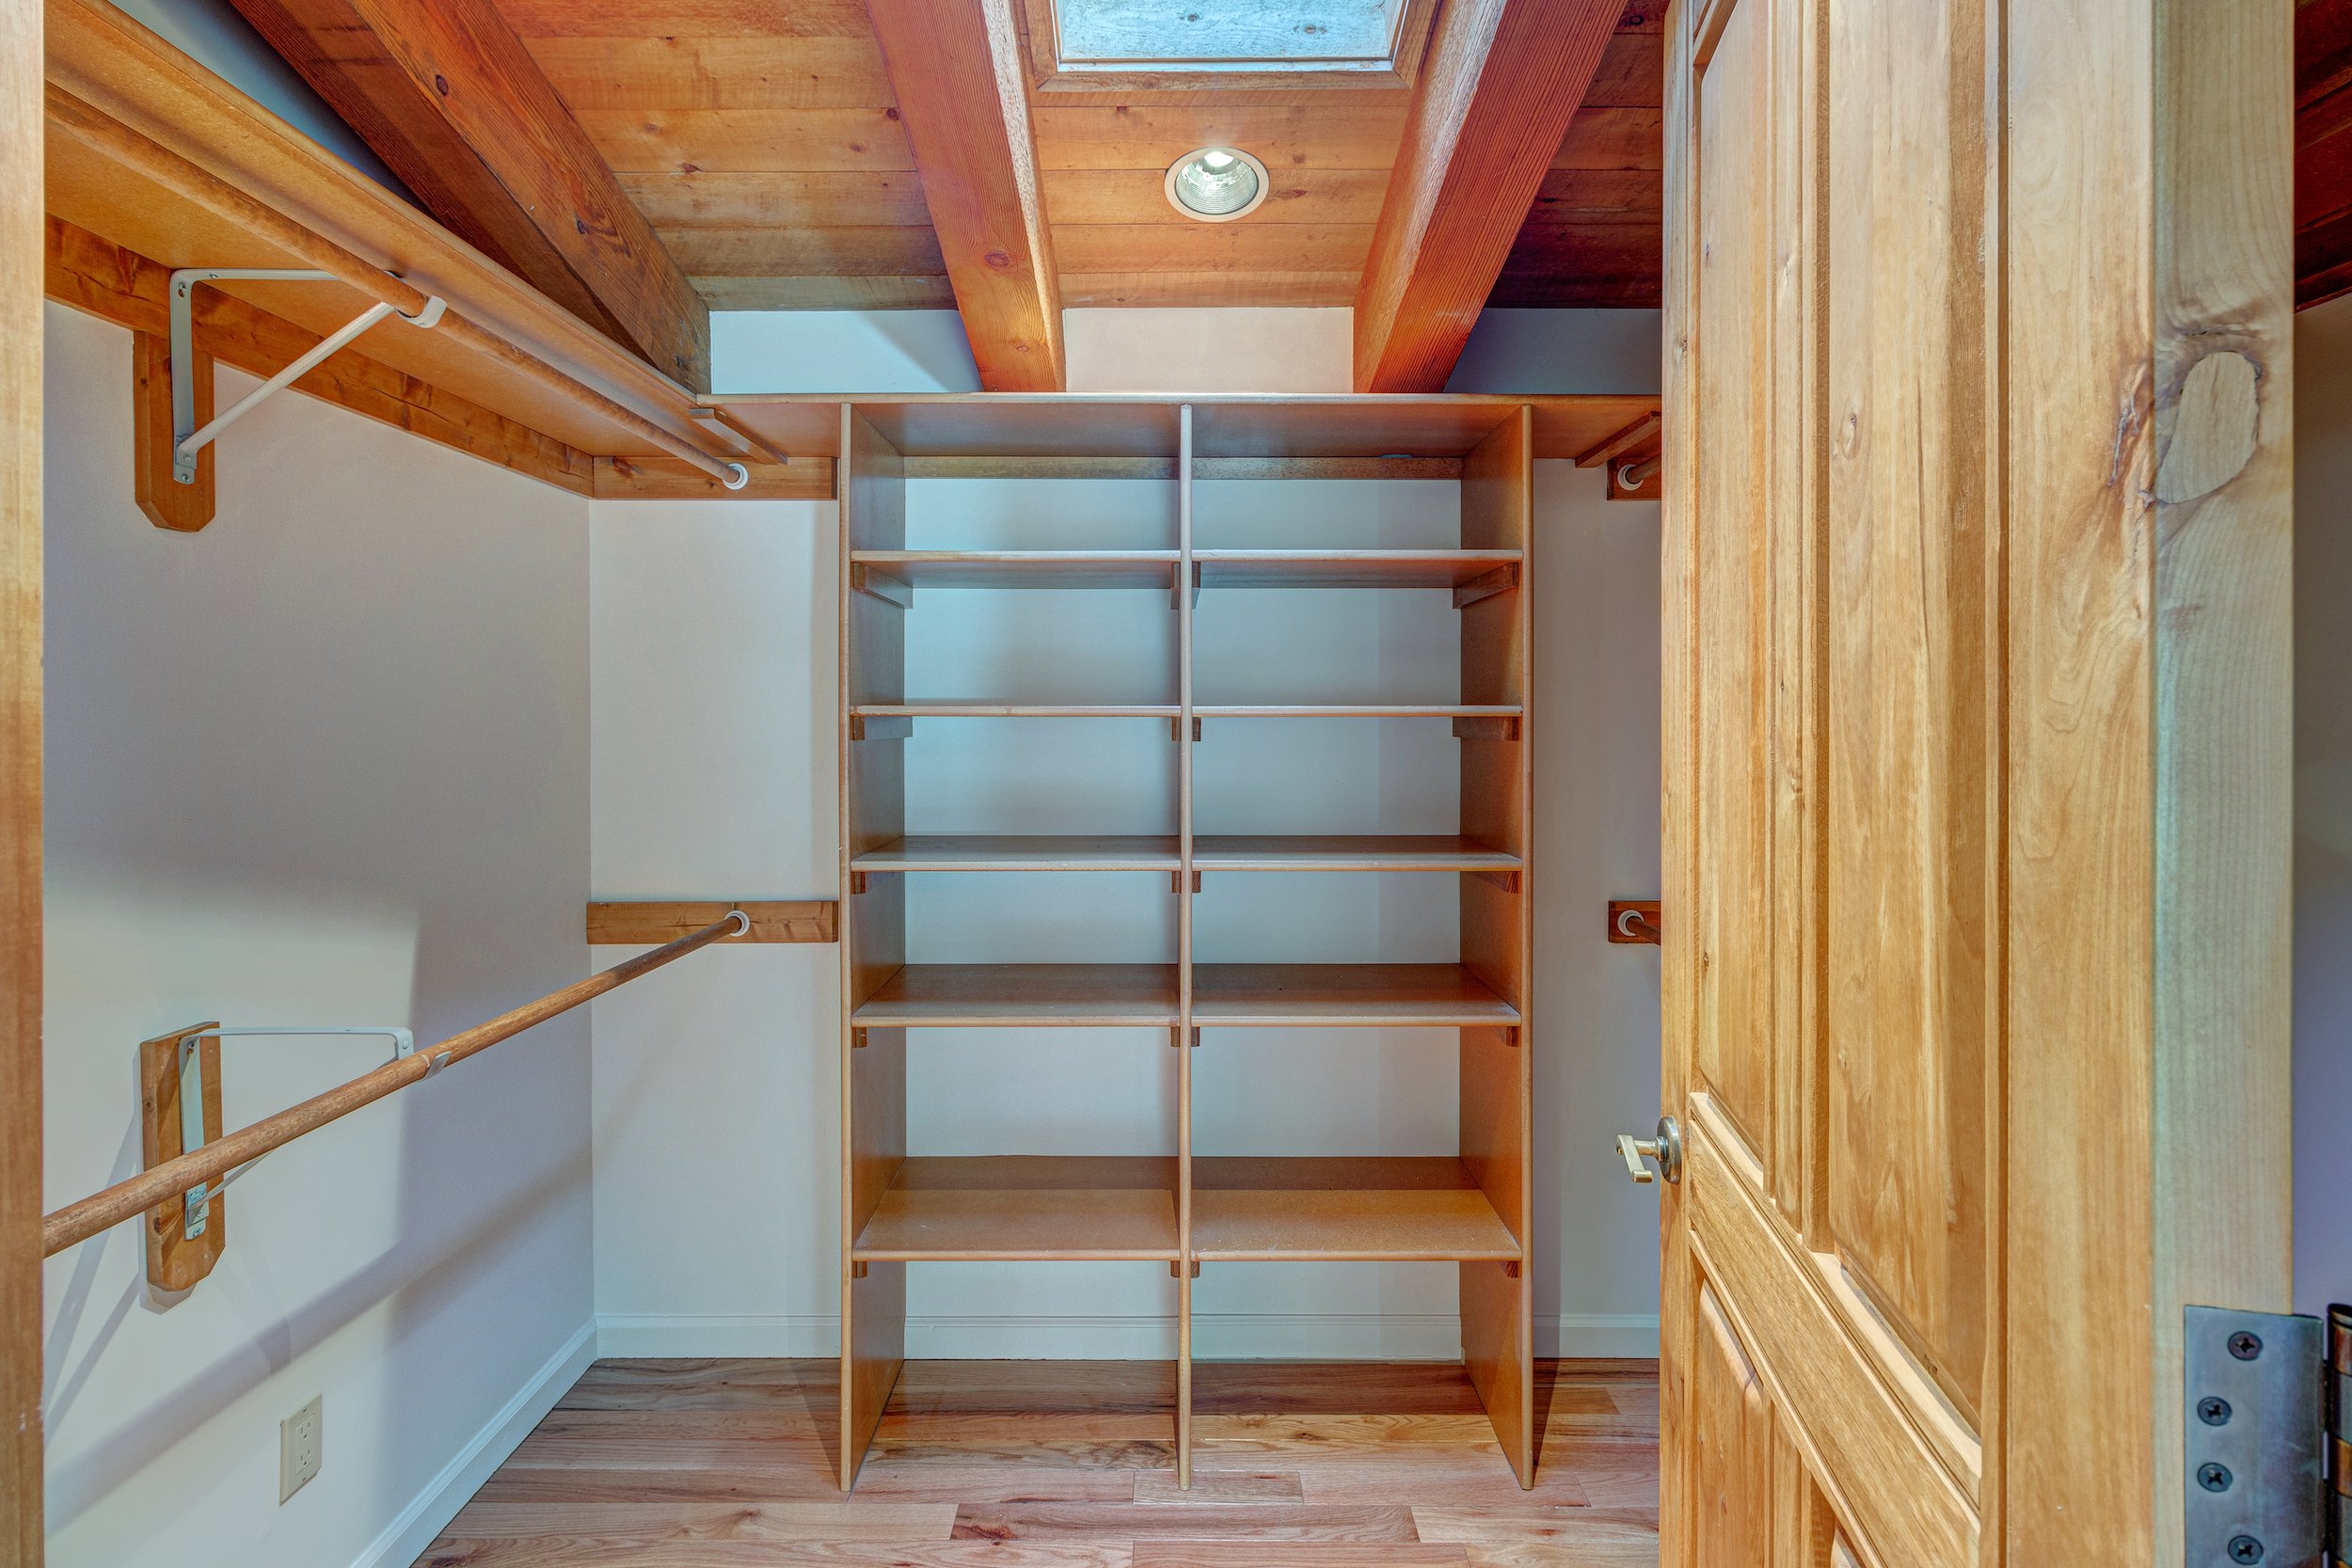 045-Even the closets have vaulted wood ceilings.jpg